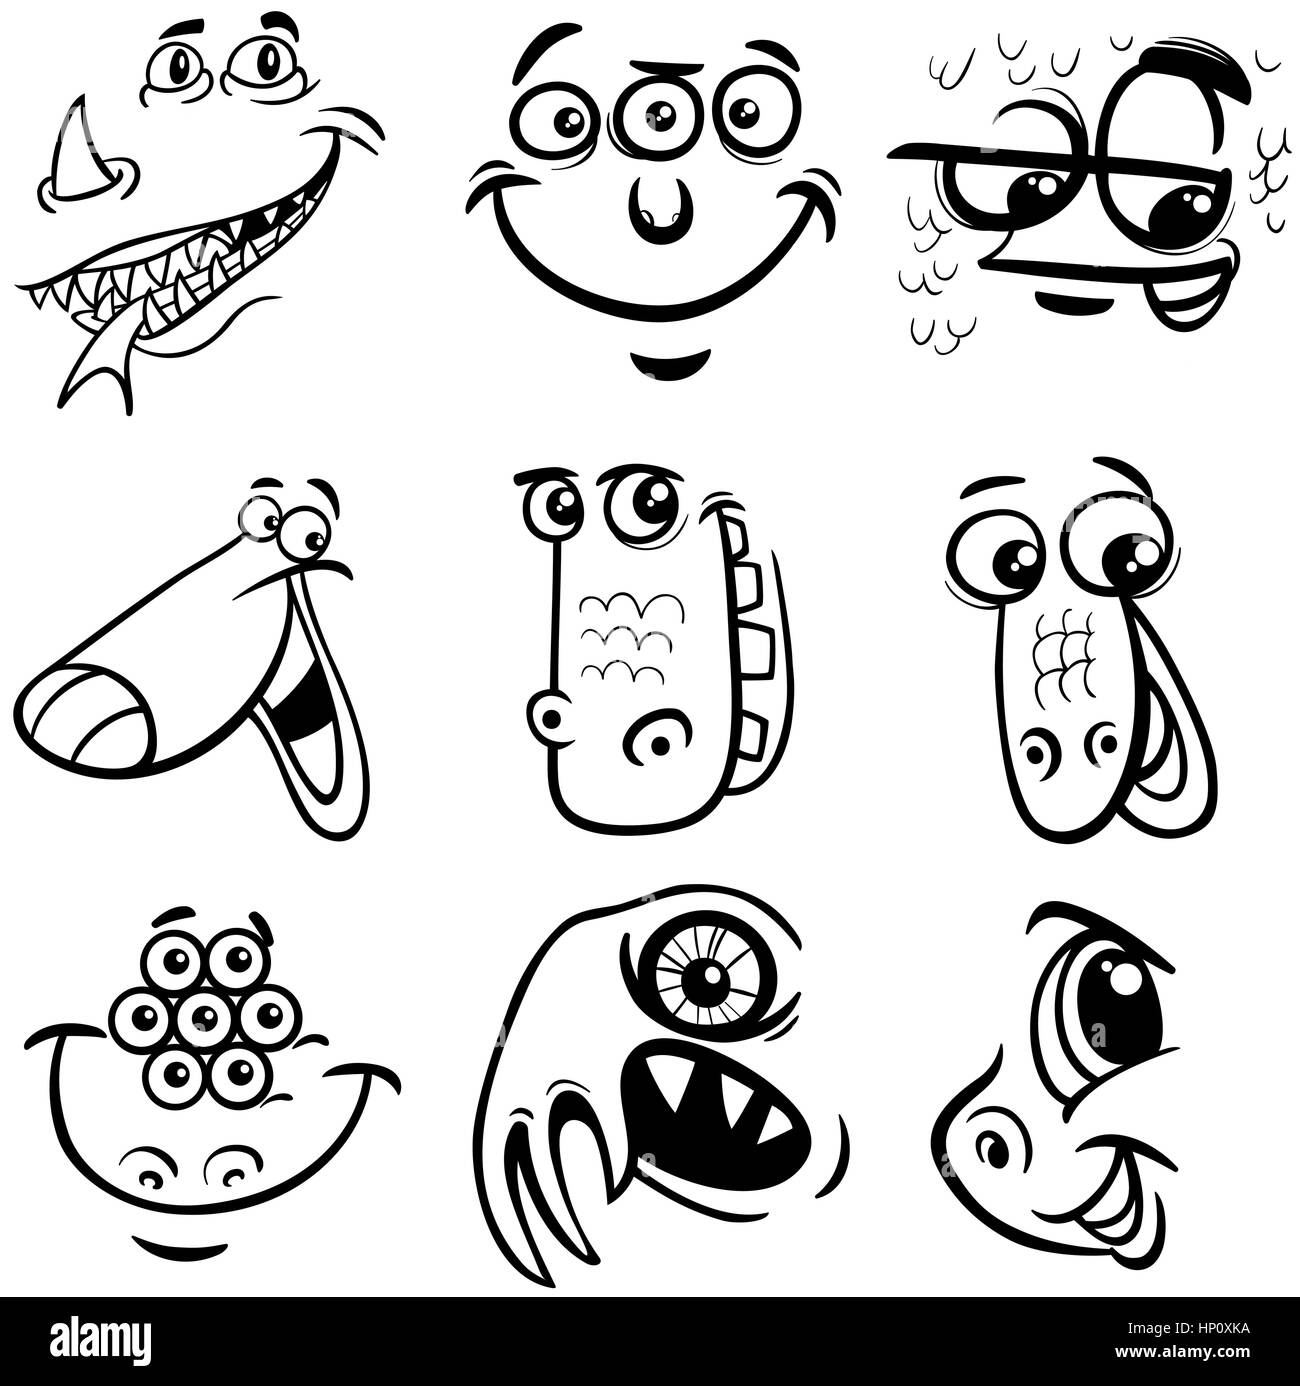 Black and White Cartoon Illustration of Monster Fictional Characters Faces Set Coloring Page Stock Vector